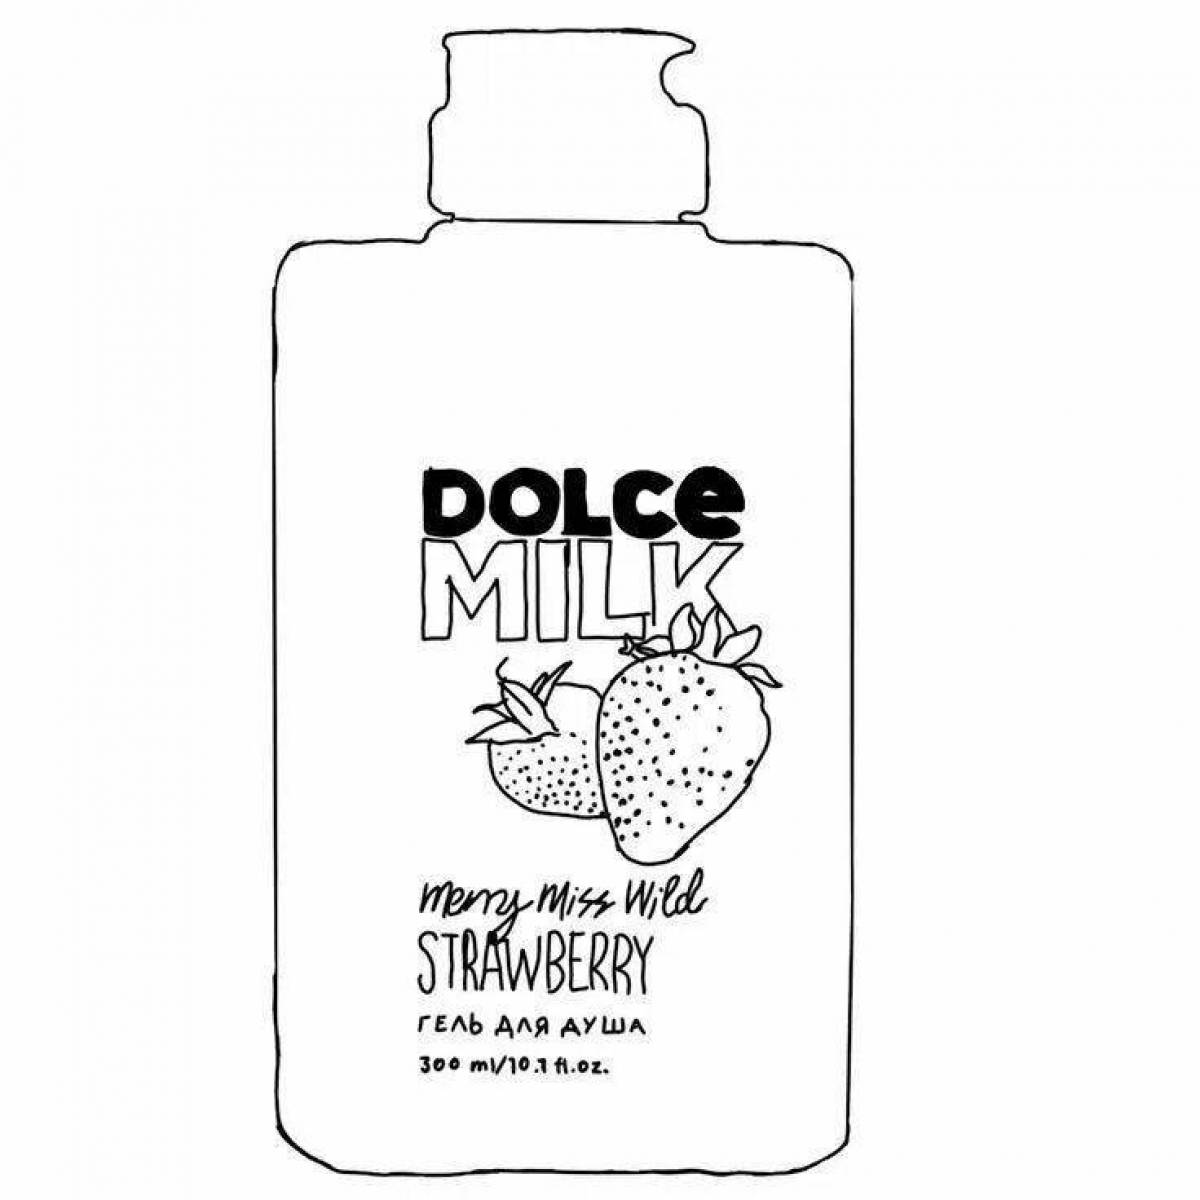 Colouring dolce glowing milk cream